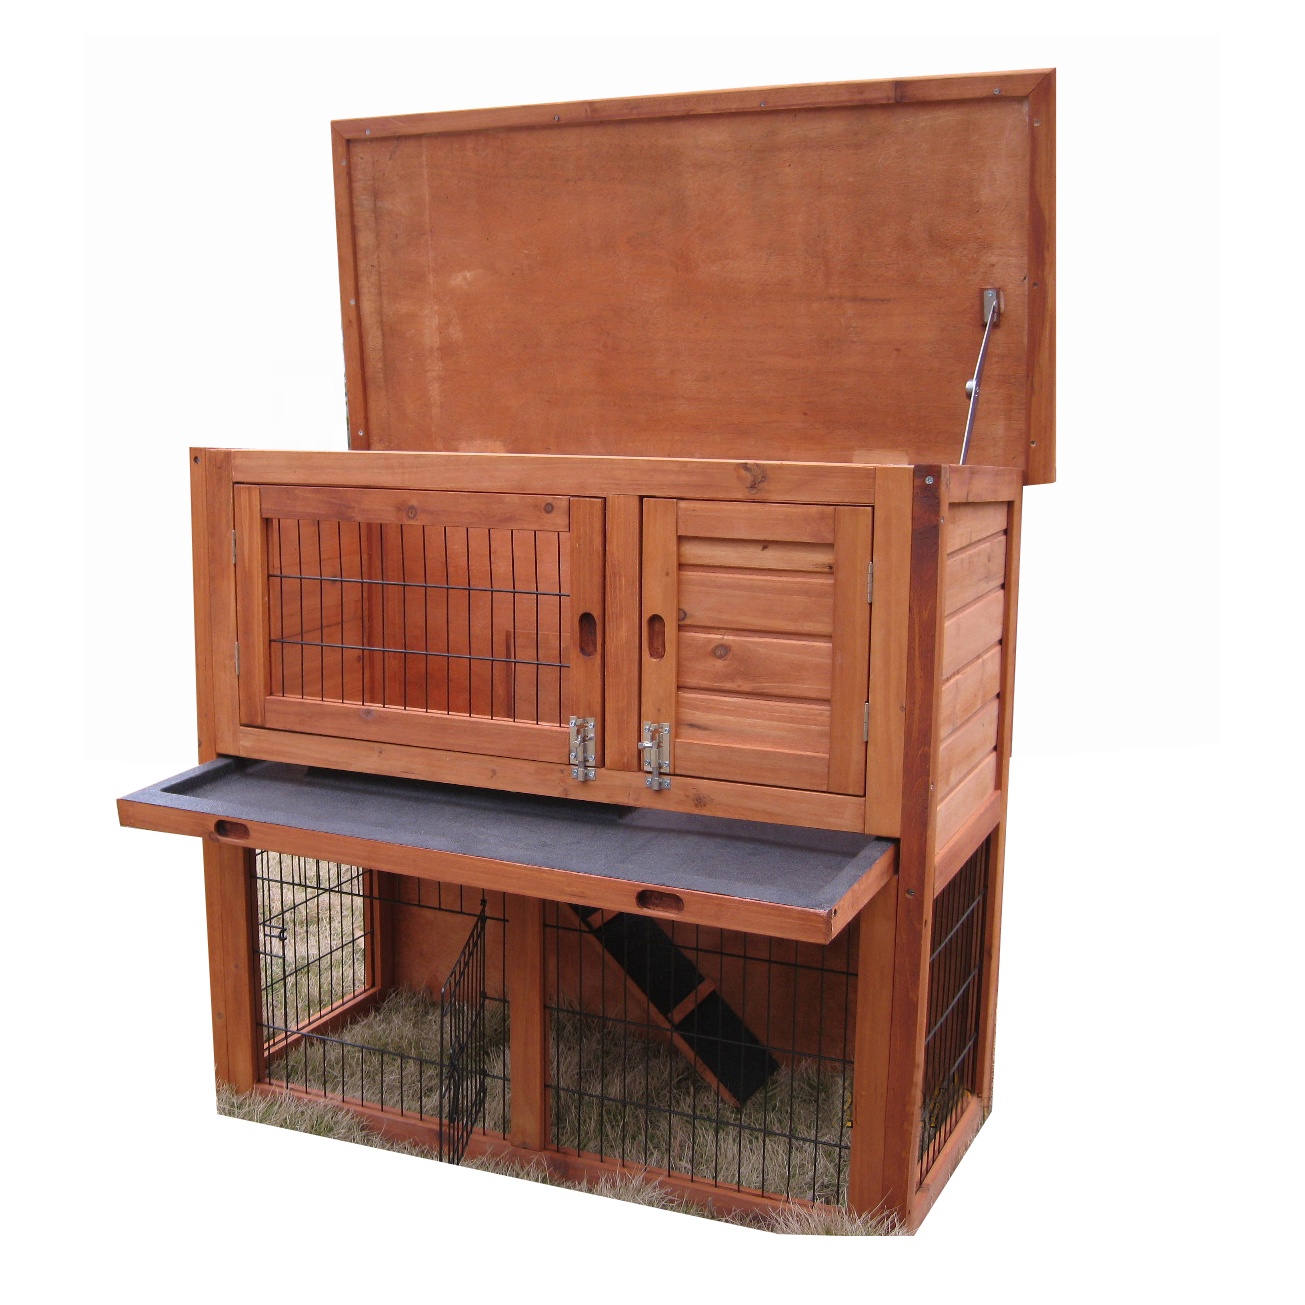 Renewable Design for Dog Travel Bag With Wheels -
 Factory Outdoor Wooden Indoor Rabbit Hutch Elevated Cage Habitat with Enclosed Run Wheels Ideal Rabbits Guinea Pig home – Easy